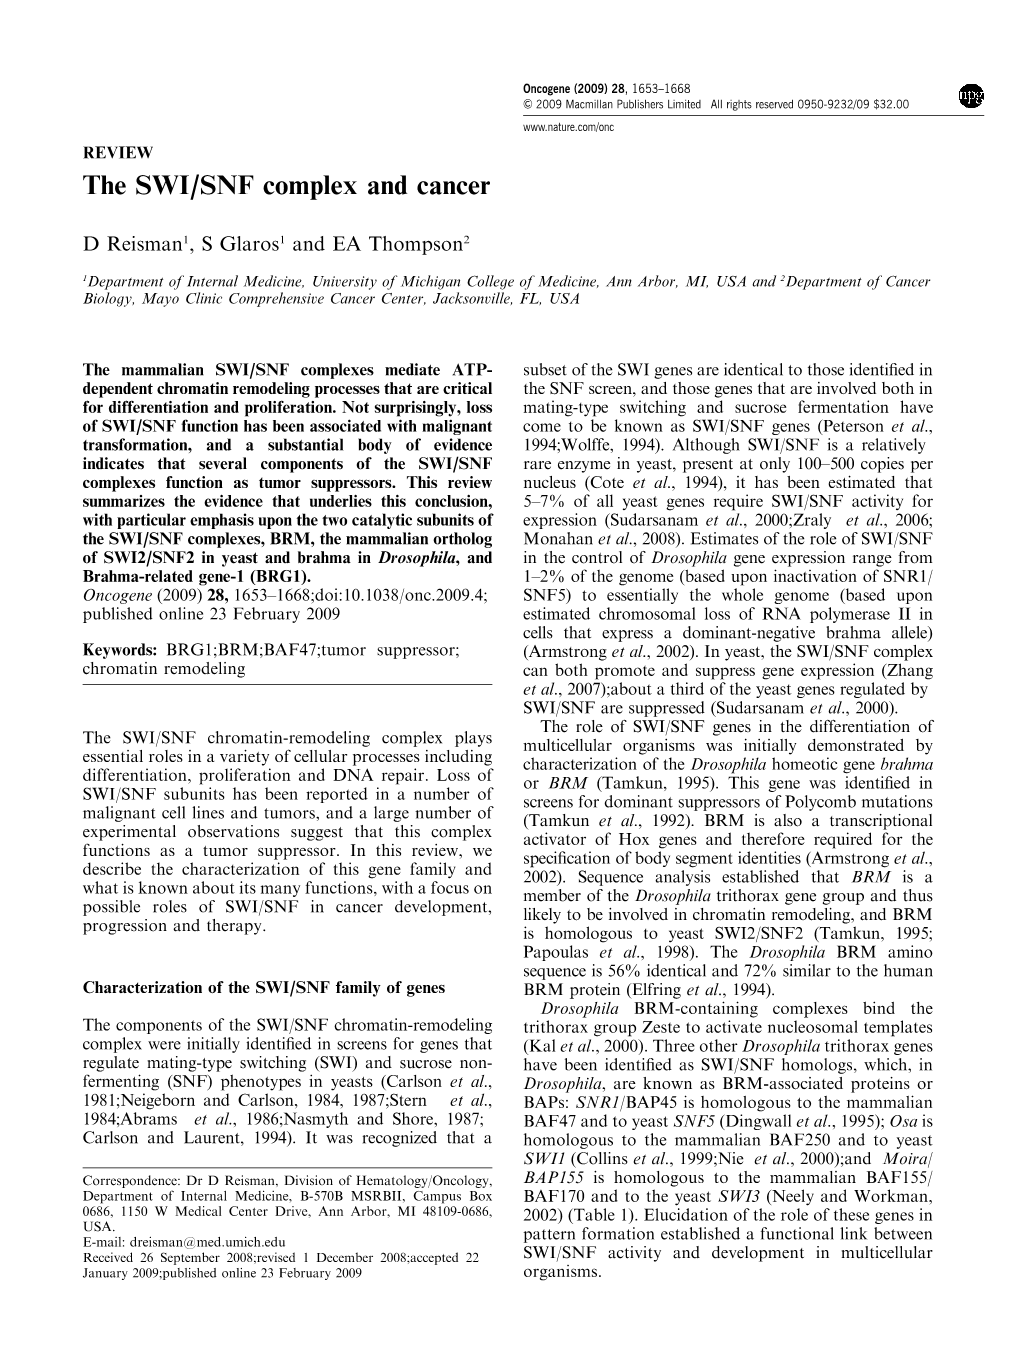 The SWI&Sol;SNF Complex and Cancer